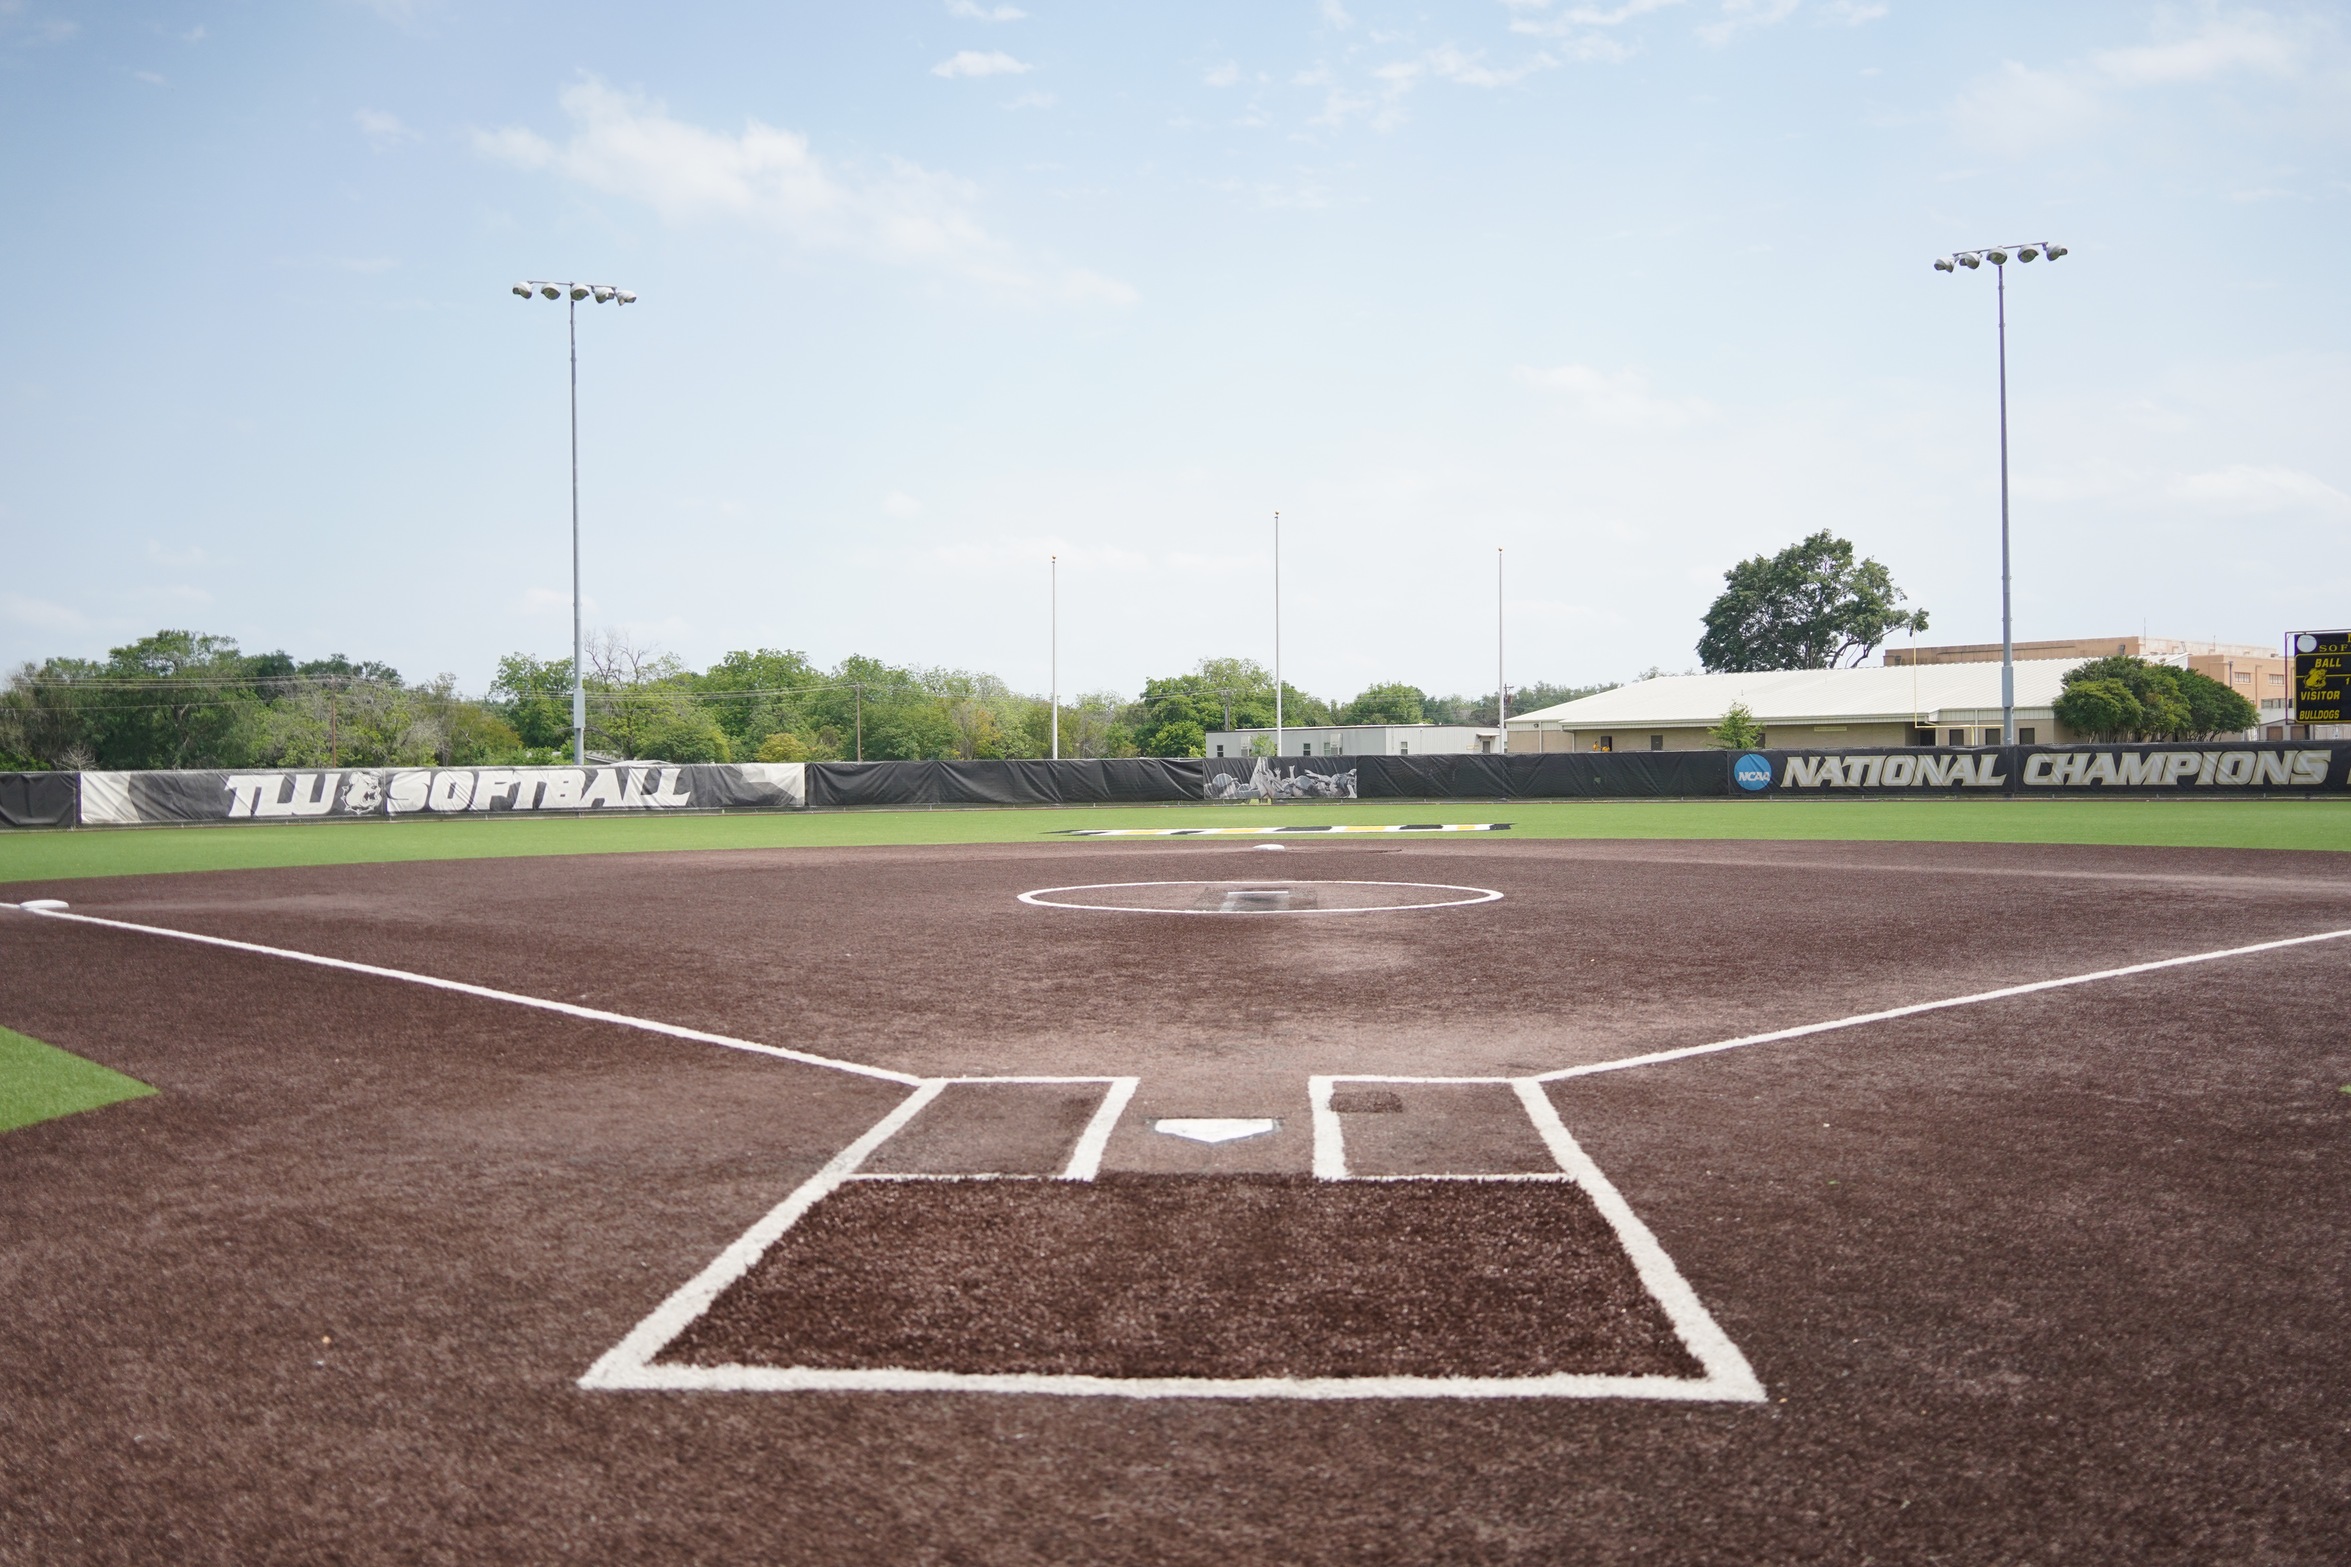 SCAC Softball Championship Game Time Announced